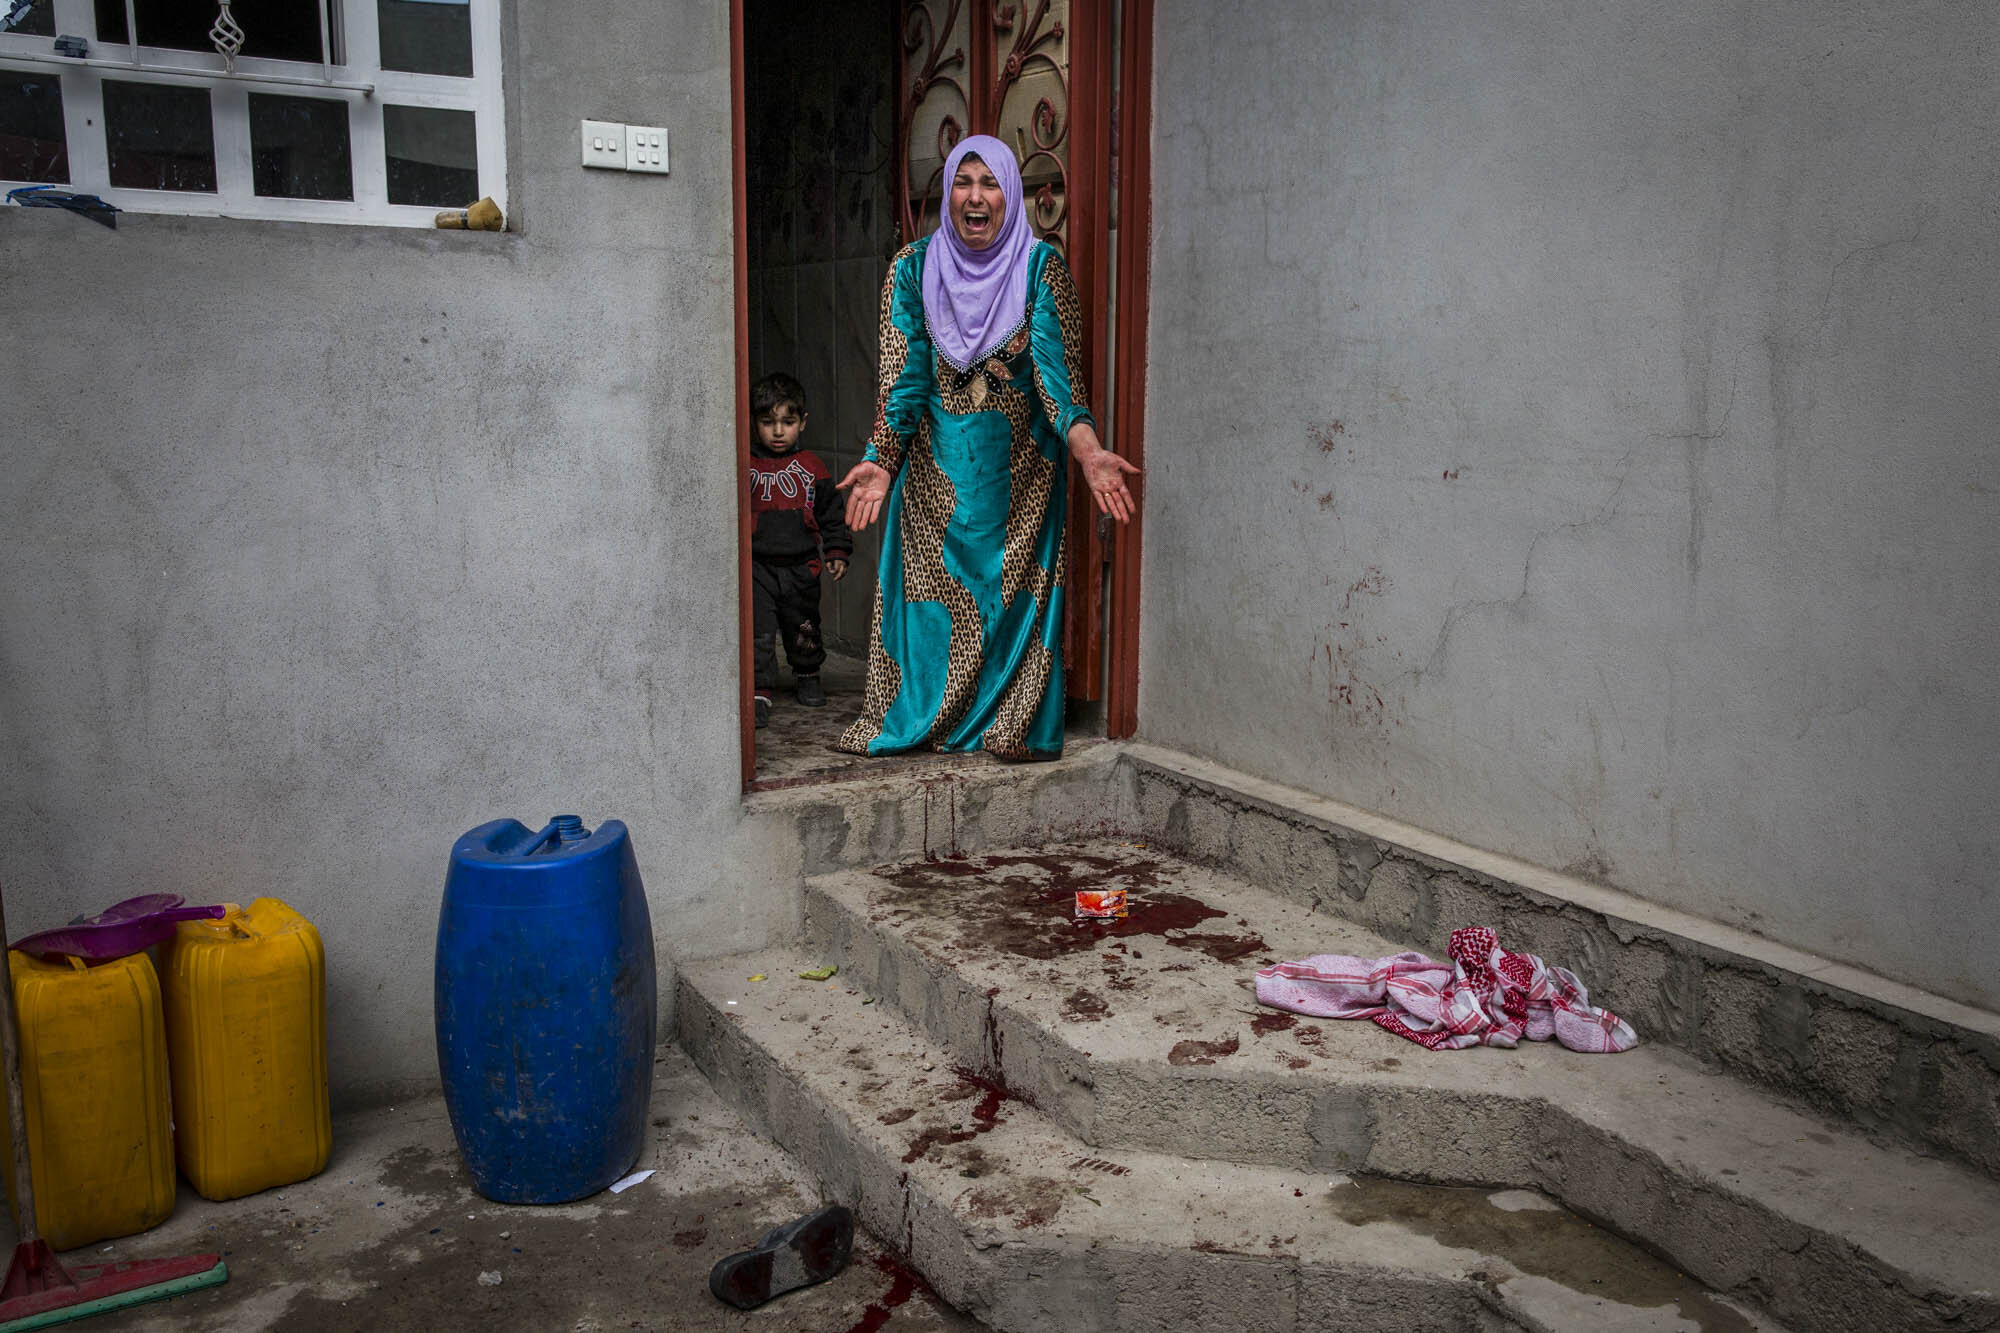  A woman screamed out in horror shortly after her son was killed in an ISIS mortar attack in the Jadidah neighbourhood of west Mosul. Iraq - March 2017 